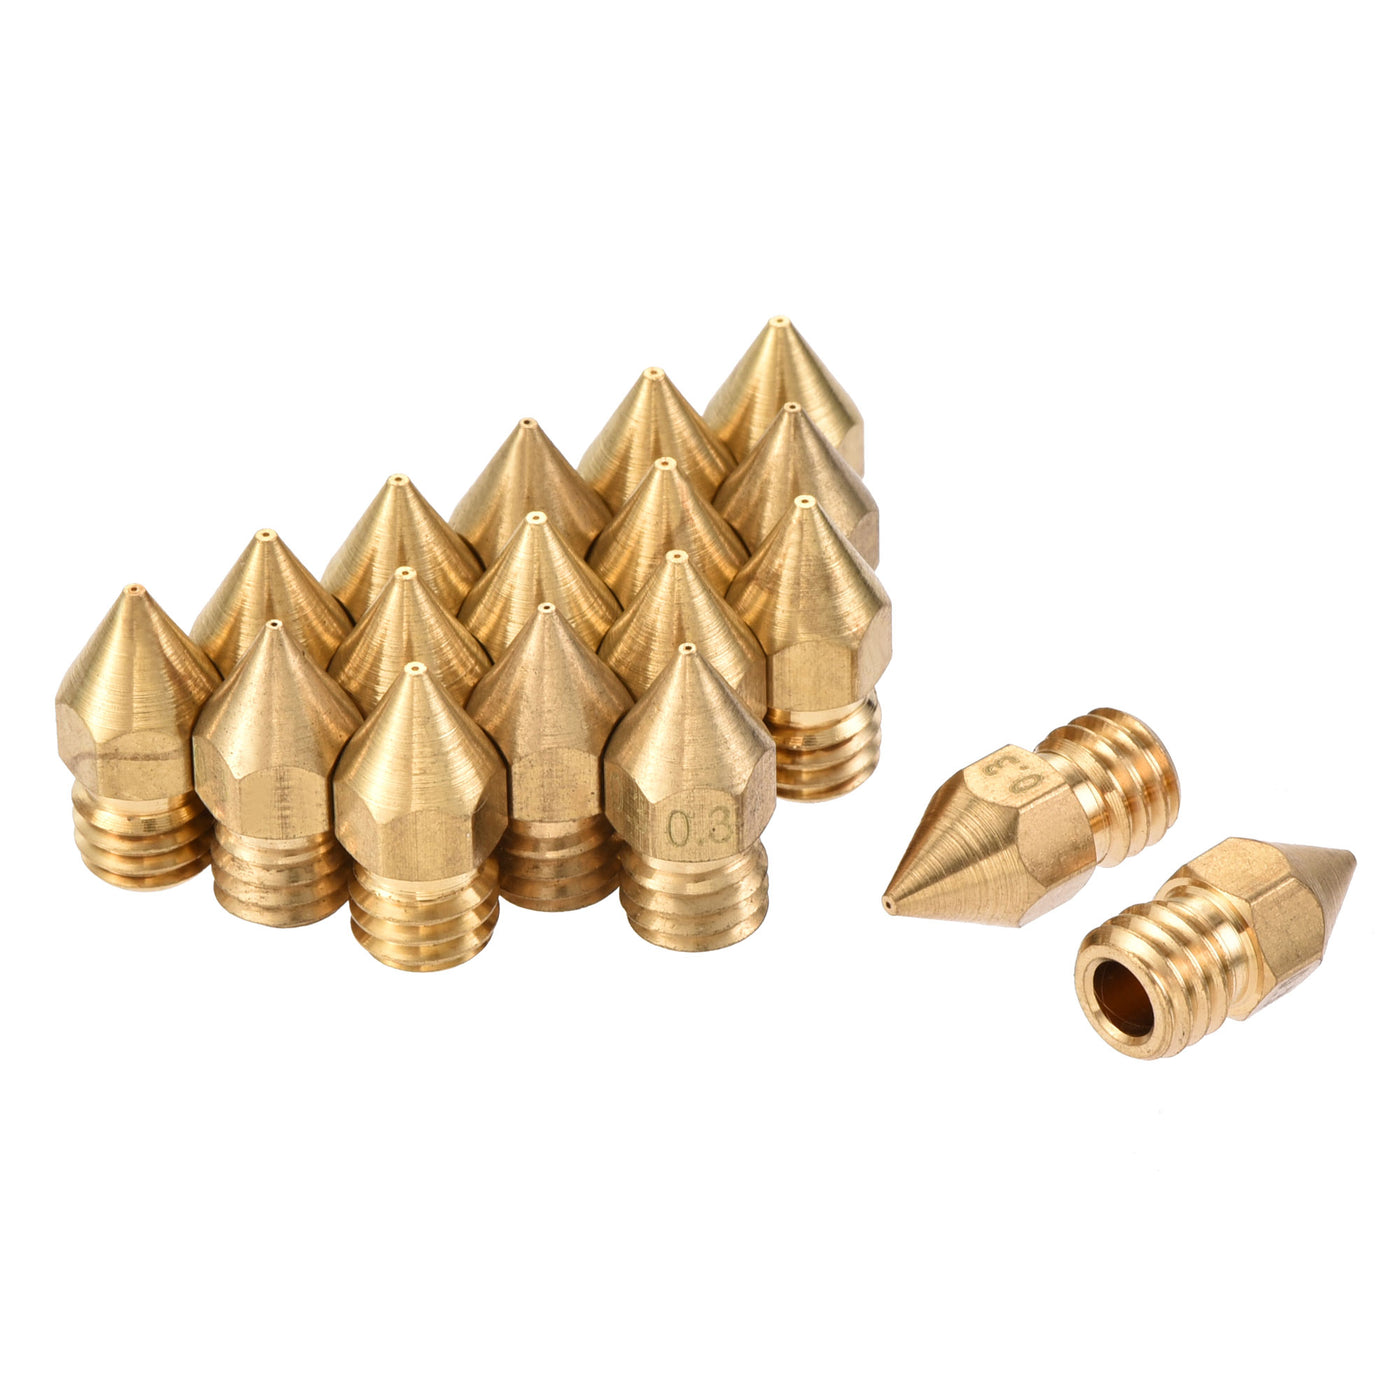 uxcell Uxcell 0.3mm 3D Printer Nozzle, 18pcs M6 Thread for MK8 3mm Extruder Print, Brass